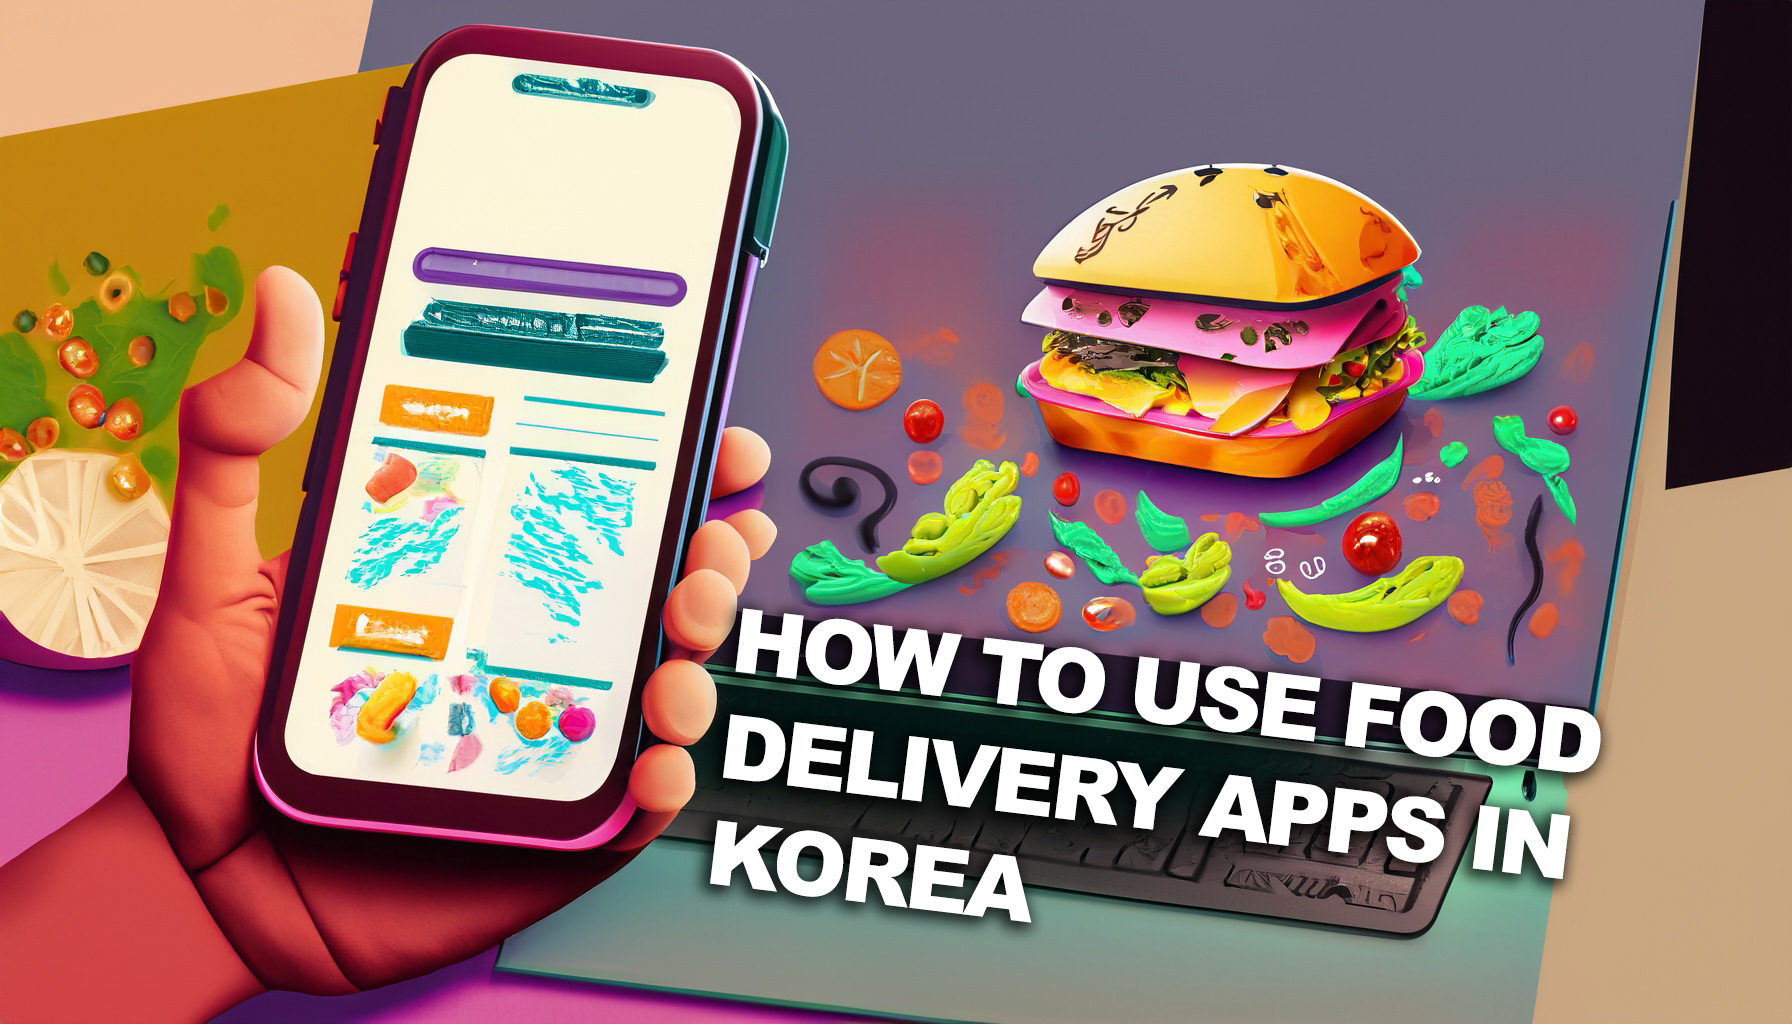 How to use food delivery apps in Korea.jpg